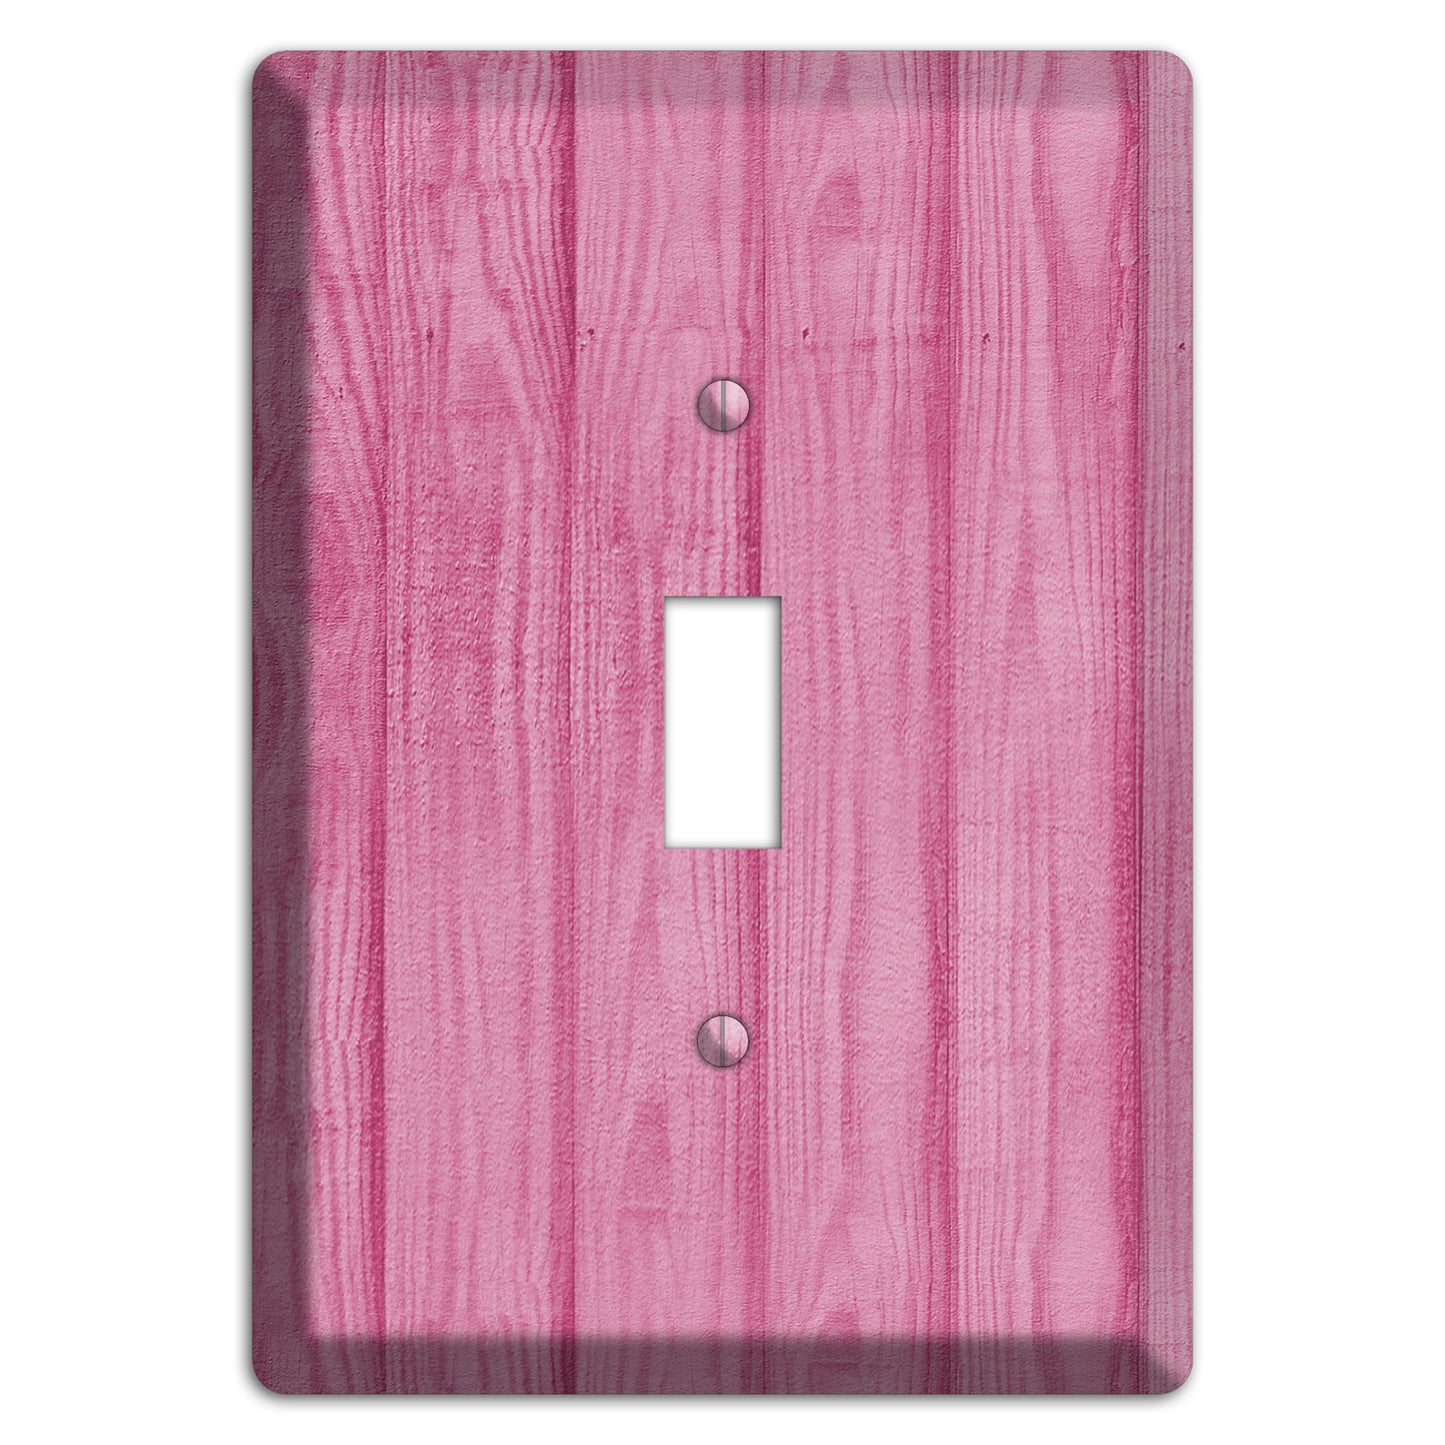 Can Can Pink Texture Cover Plates